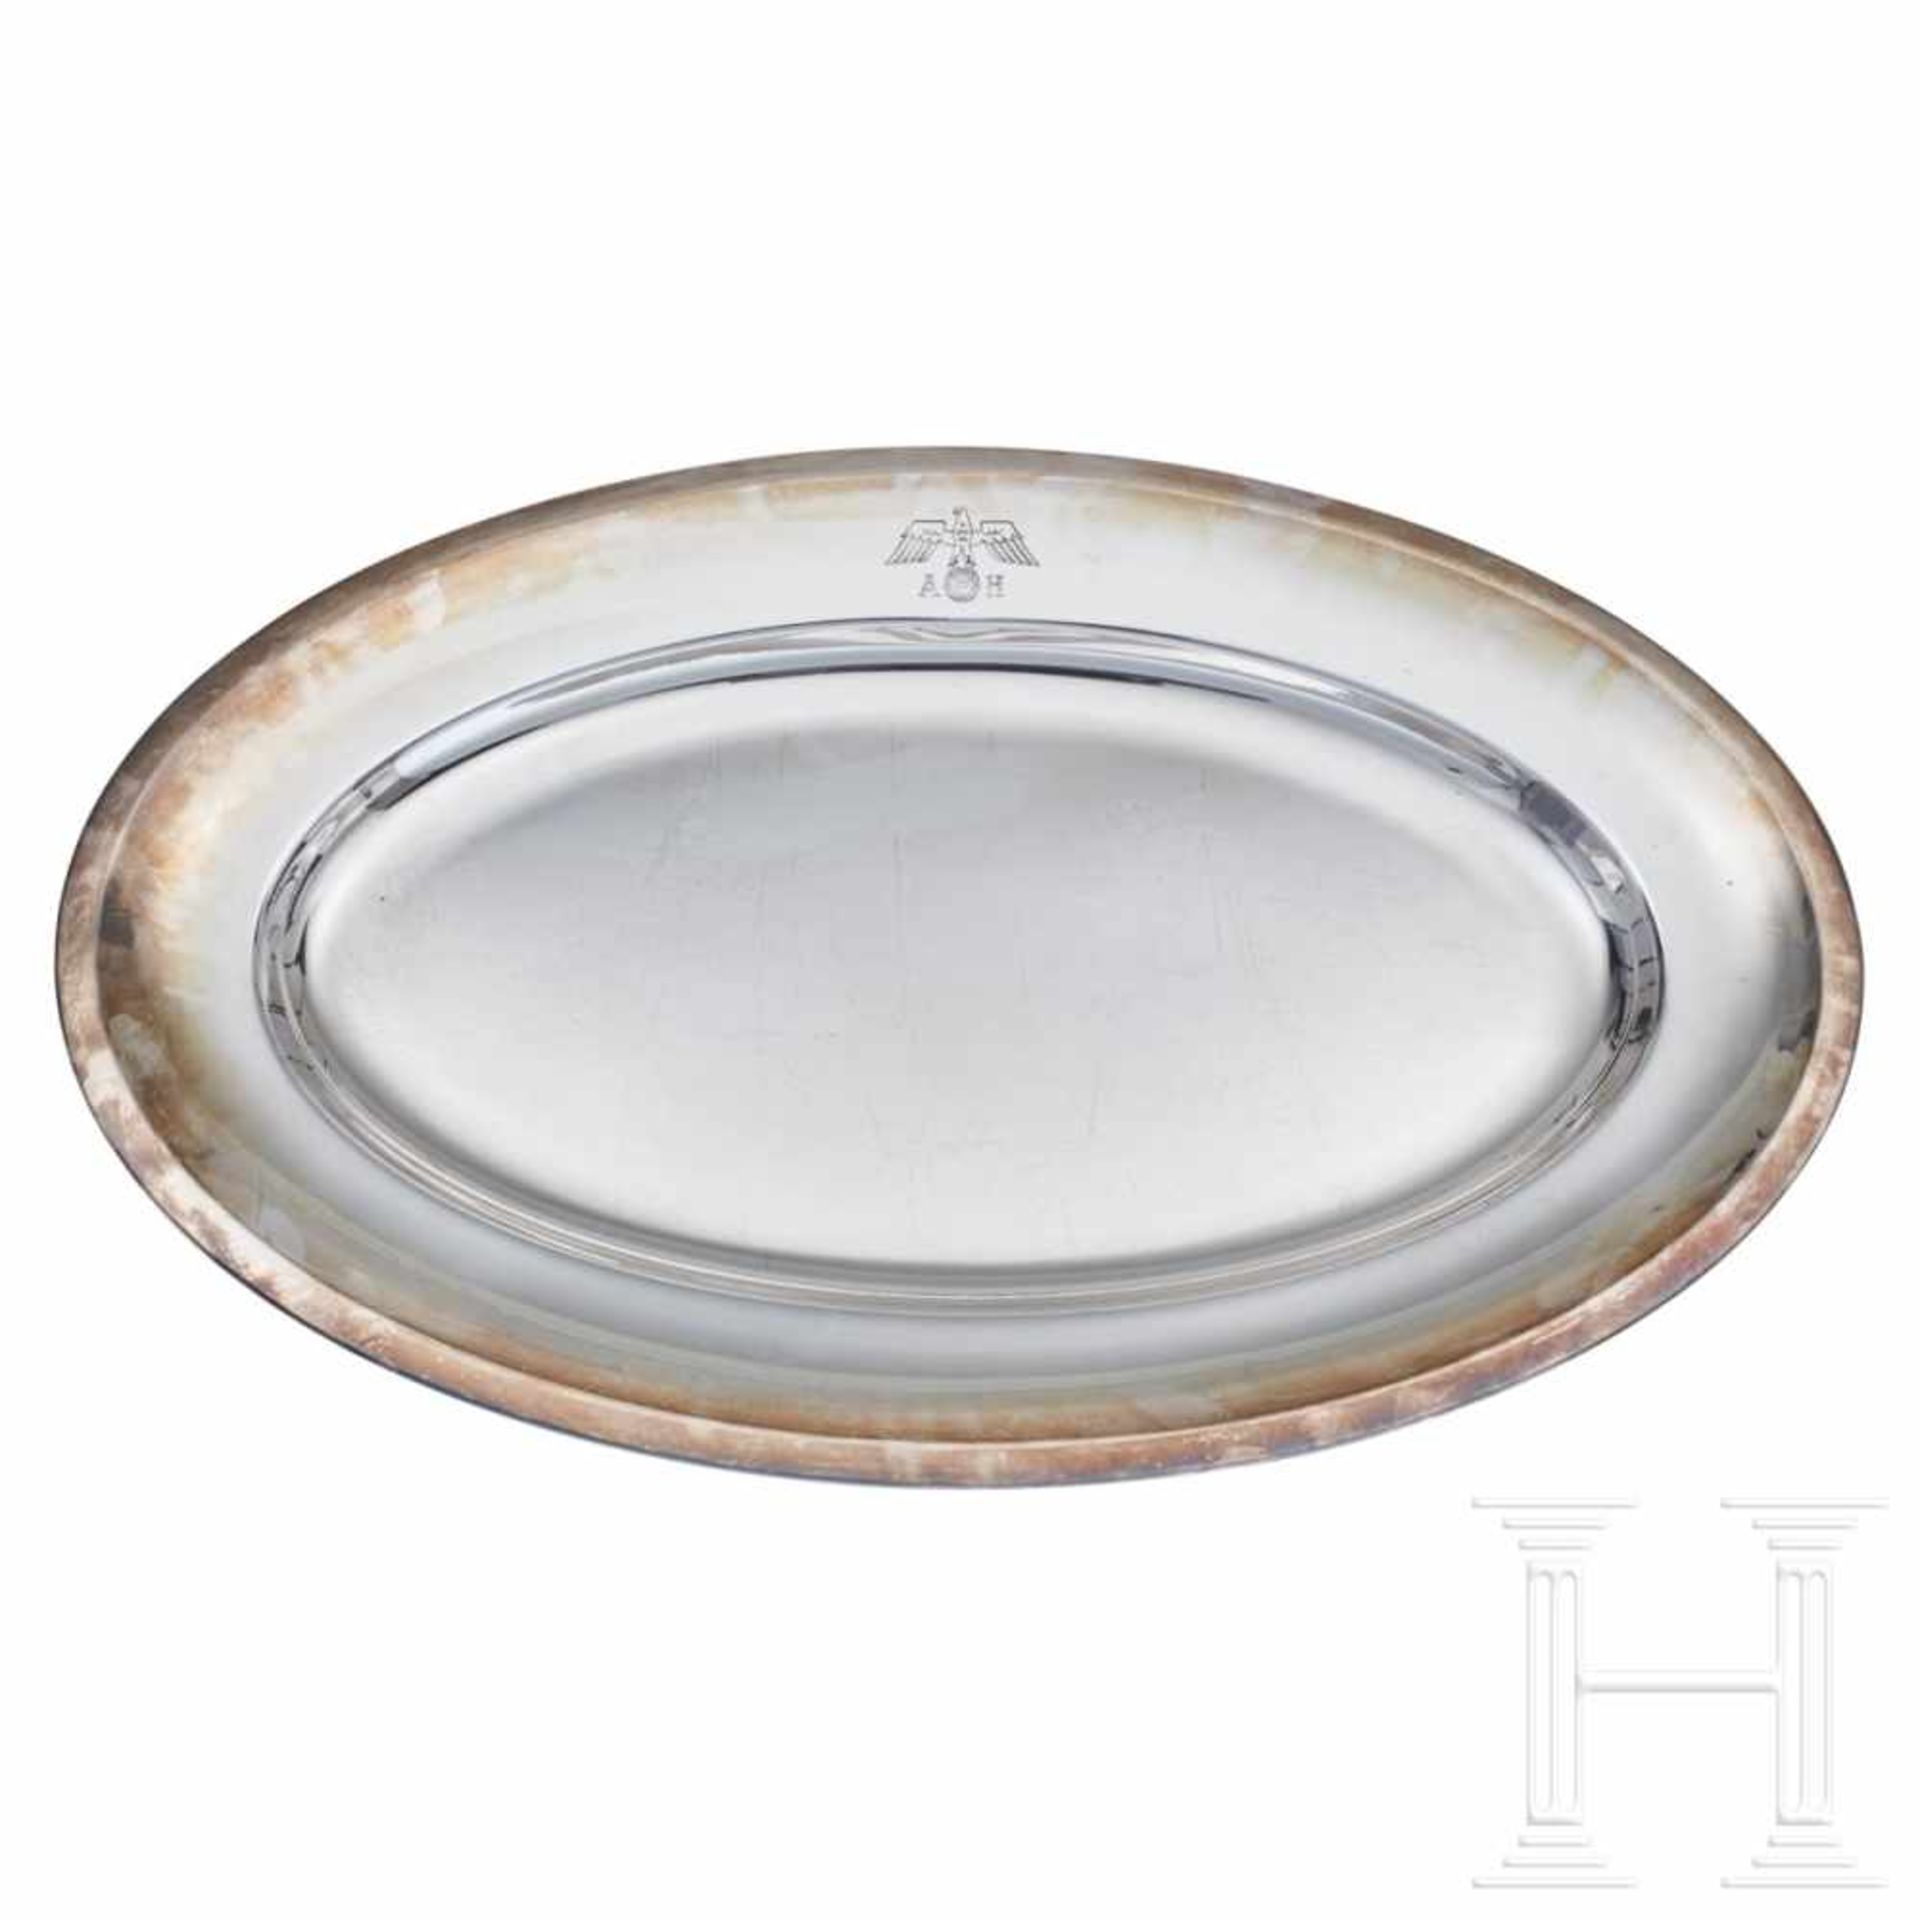 Adolf Hitler – a Large Oval Serving Tray from his Personal Silver Servicelarge, oval tray with